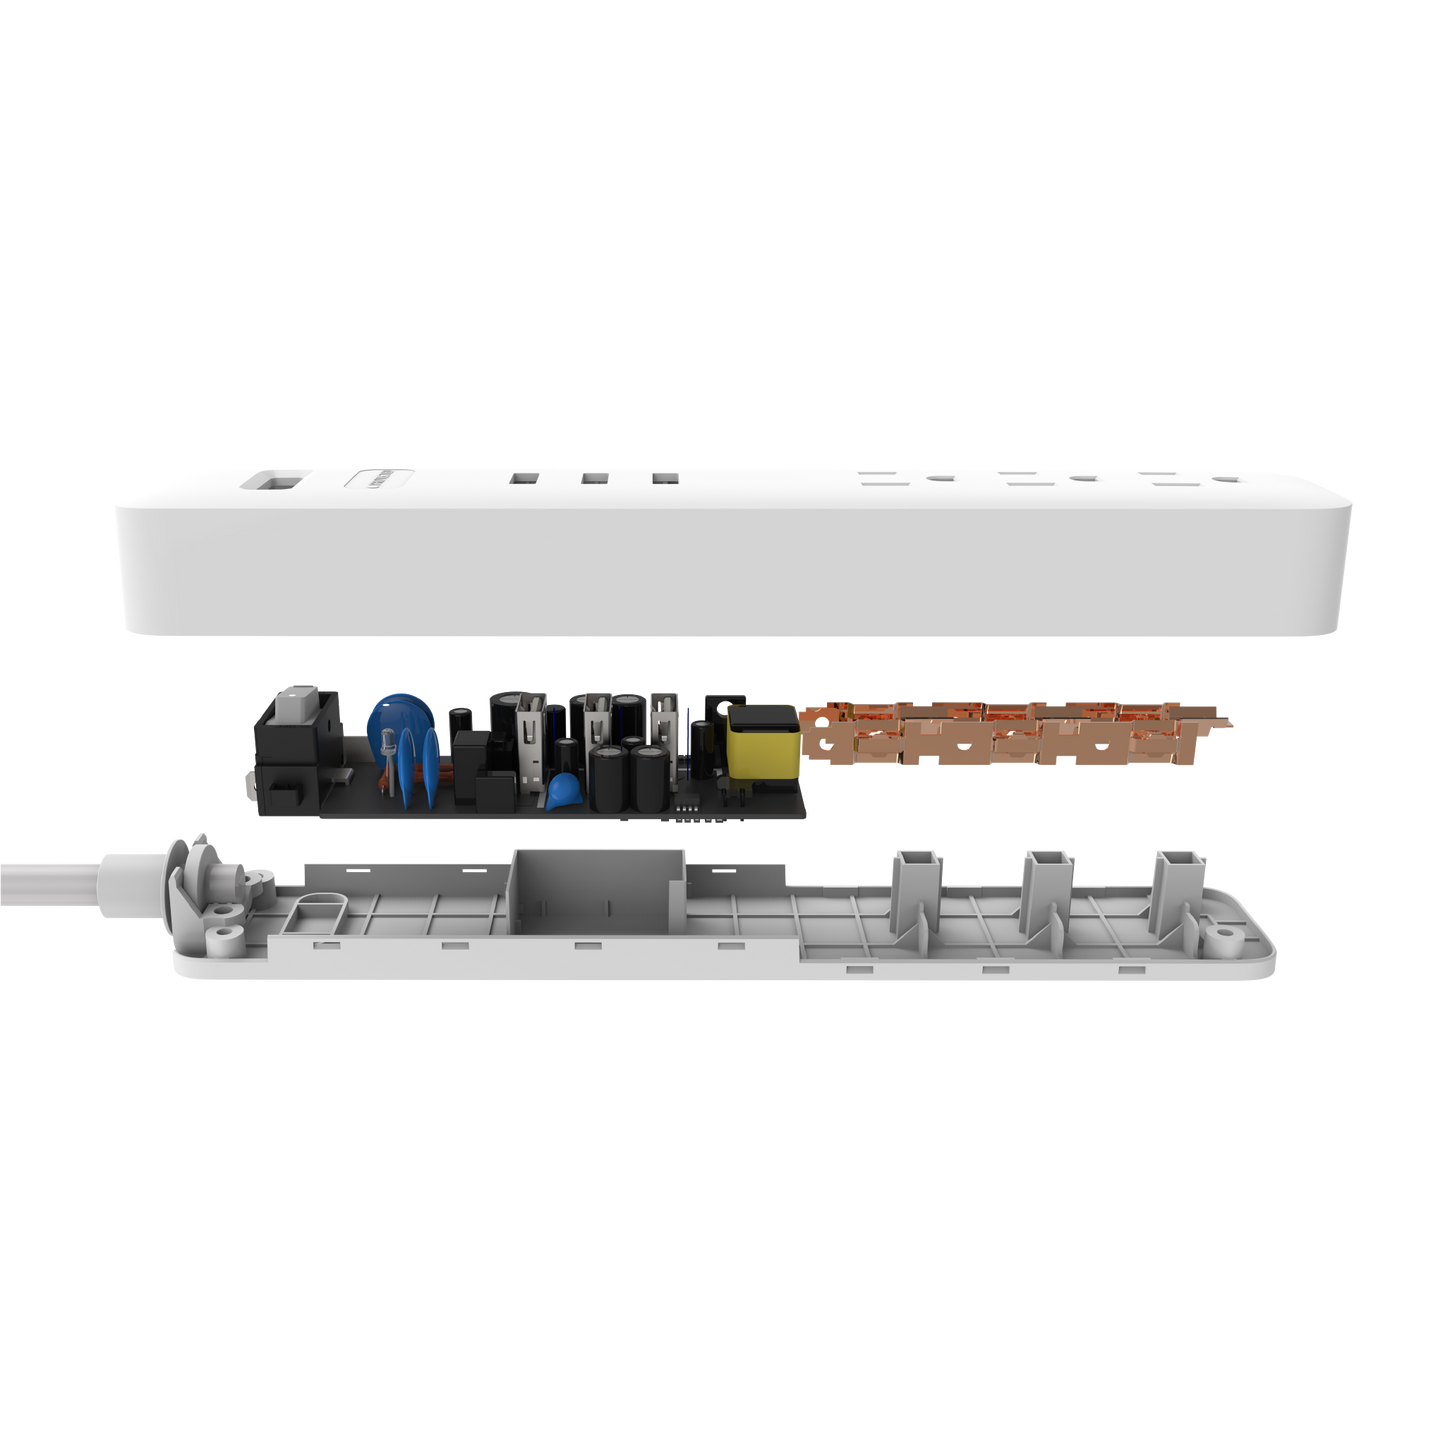 Exploded view of power strip to show the internal components of the product.